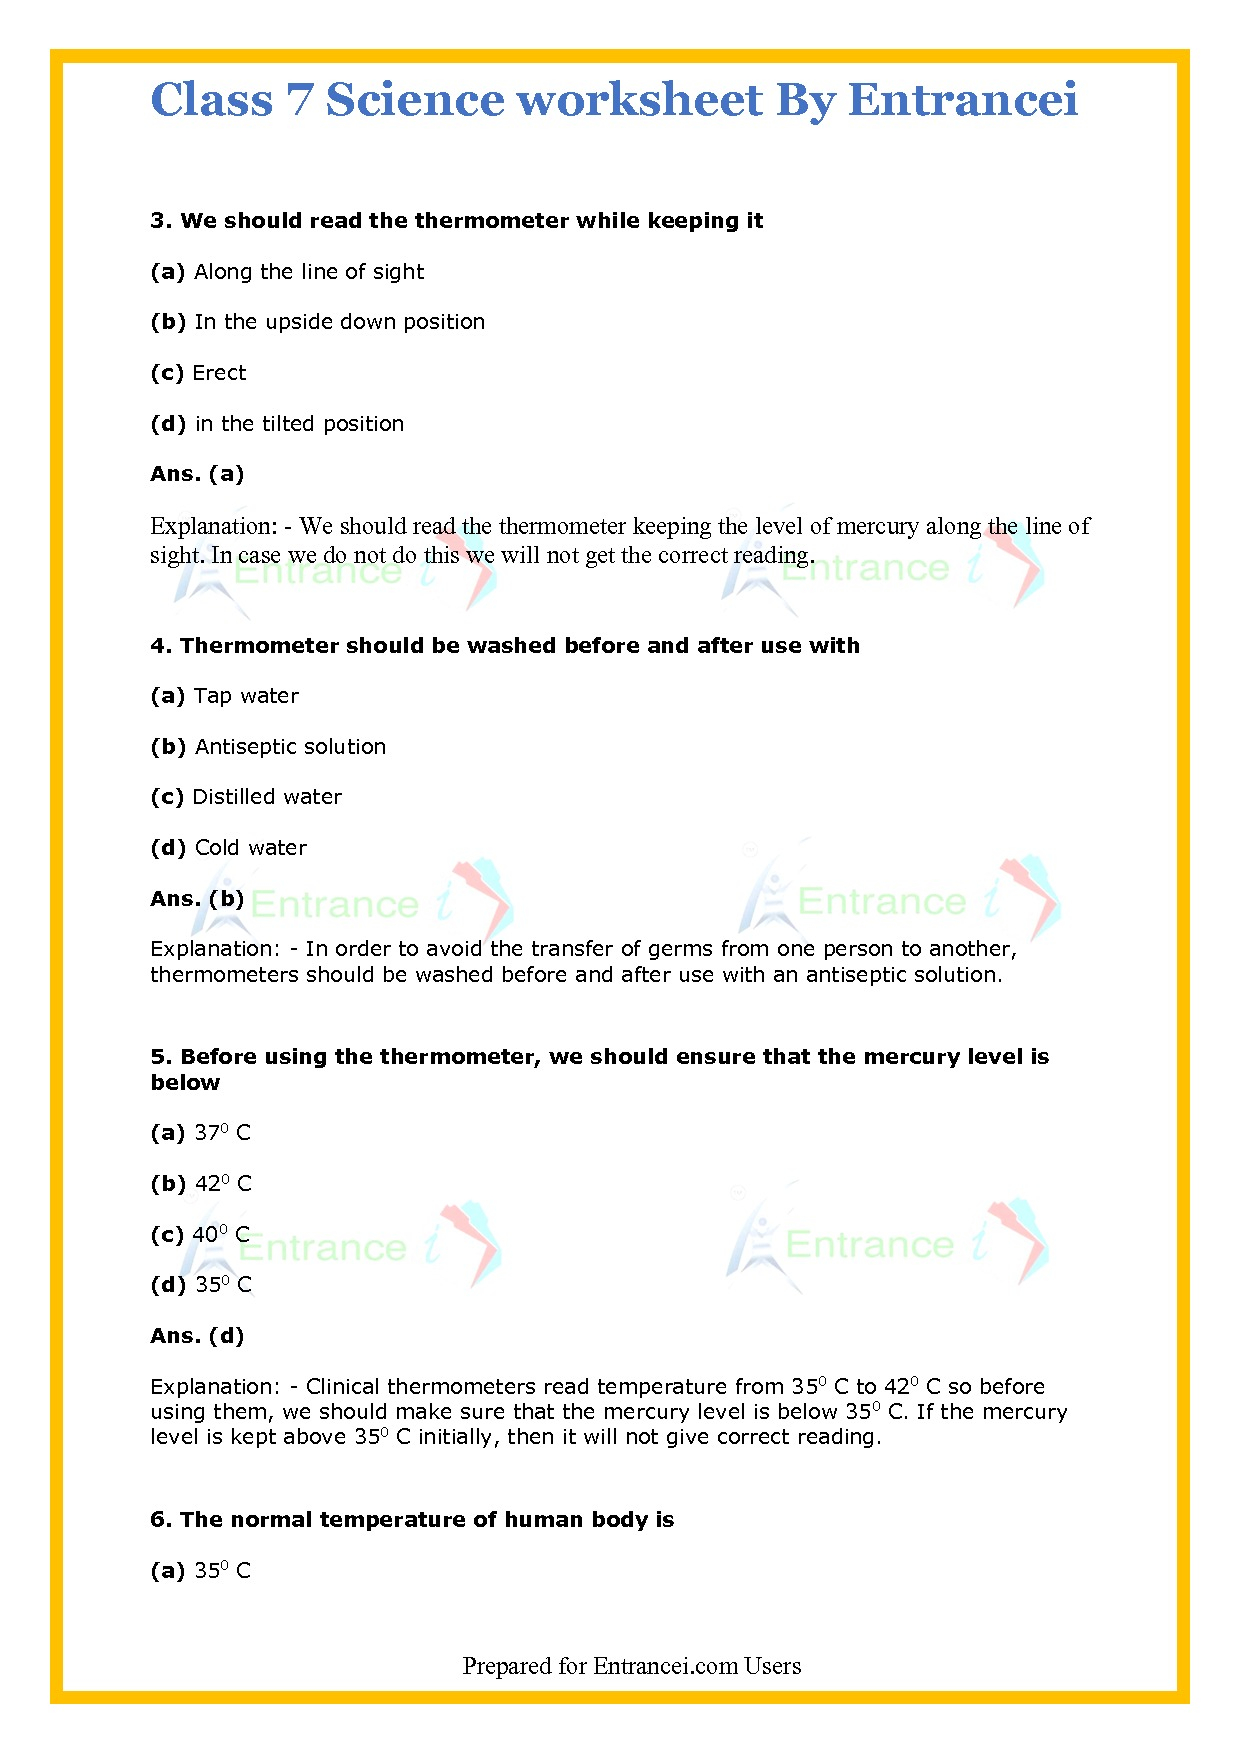 Class 7 Science Worksheet With Detail Solutions For Chapter 4 Heat